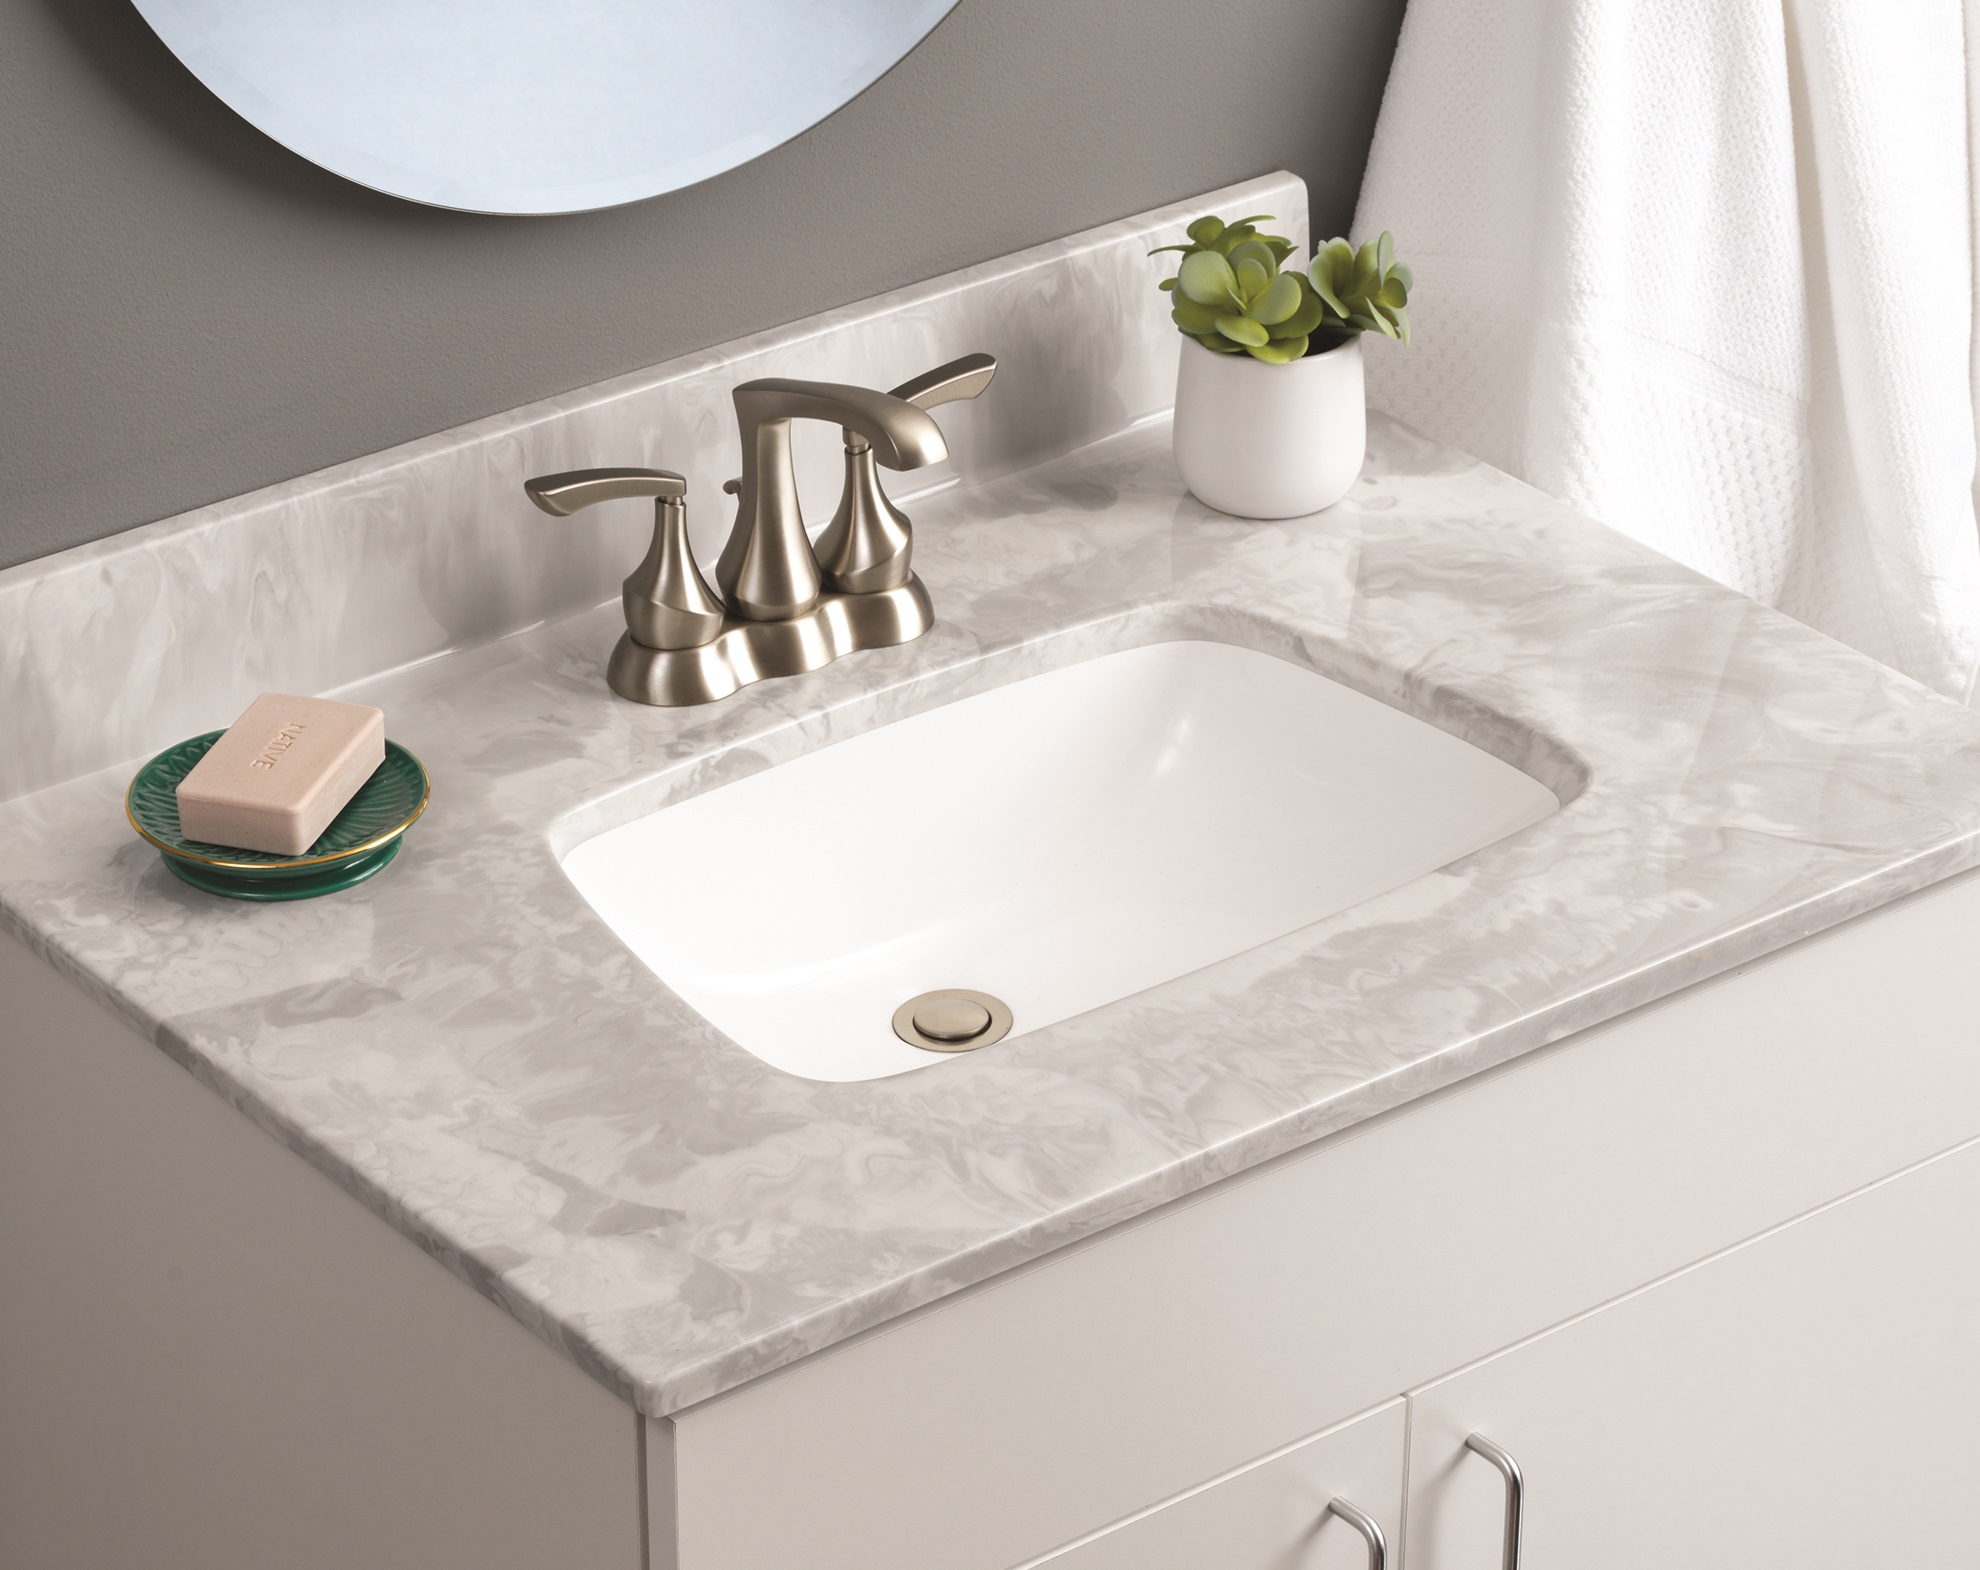 How to Incorporate Cultured Marble Vanity Sinks in a Vintage Bathroom Design